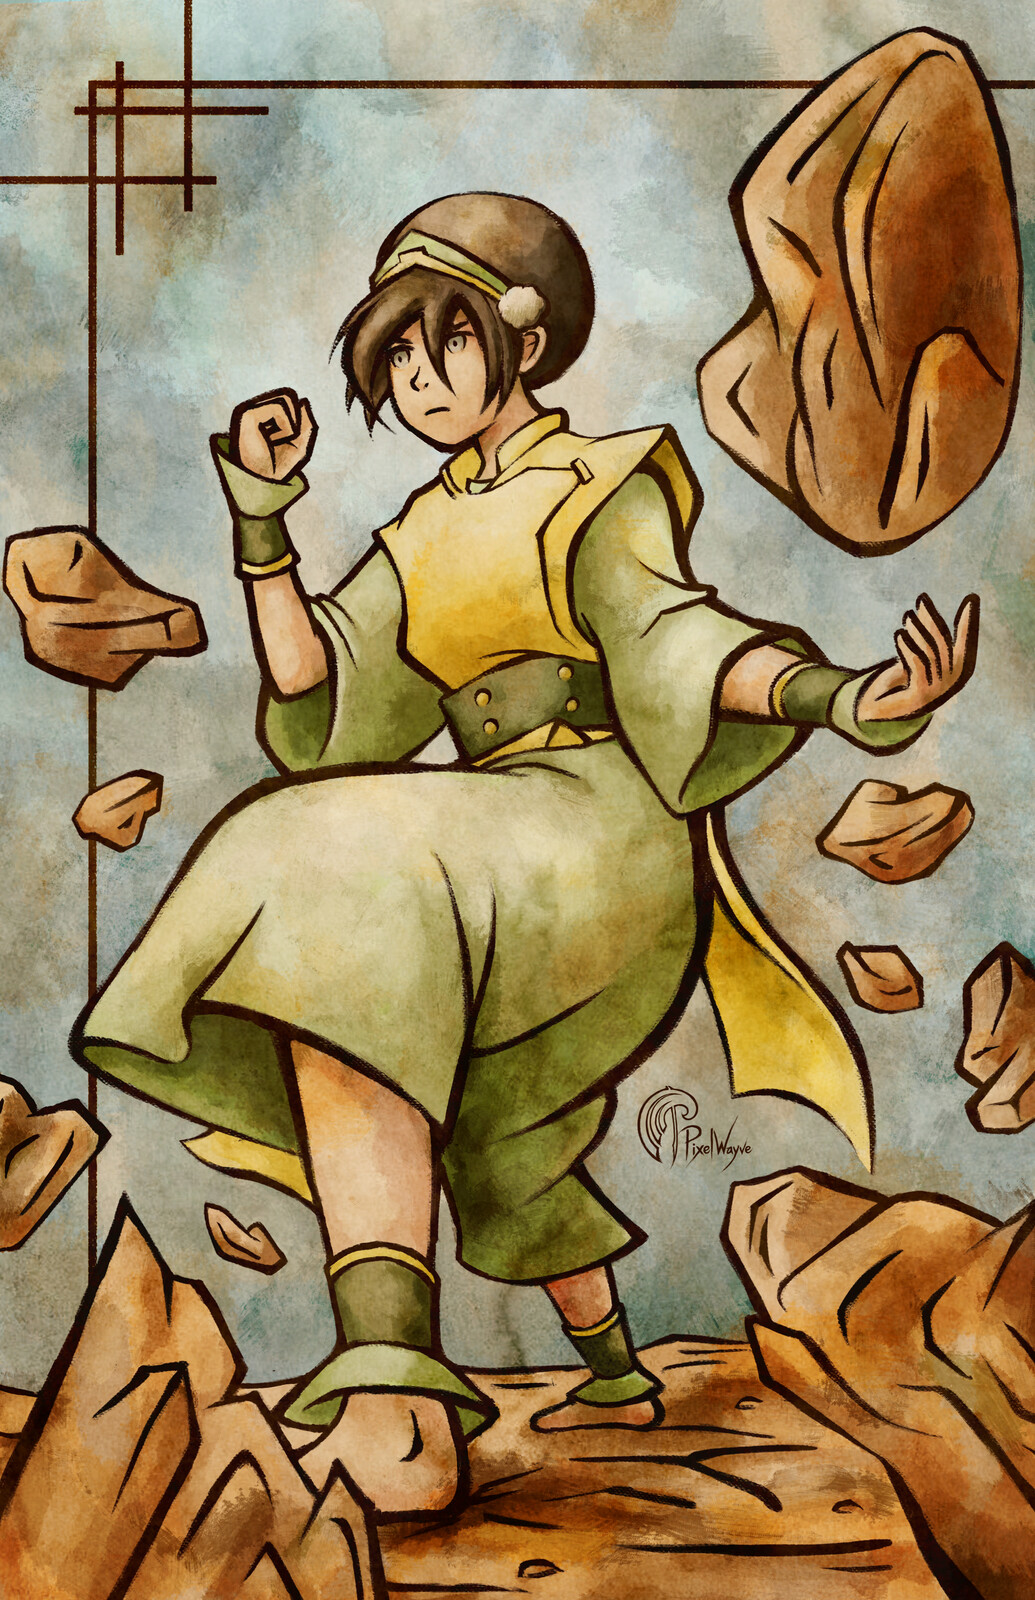 Toph Beifong from Avatar: the Last Airbender